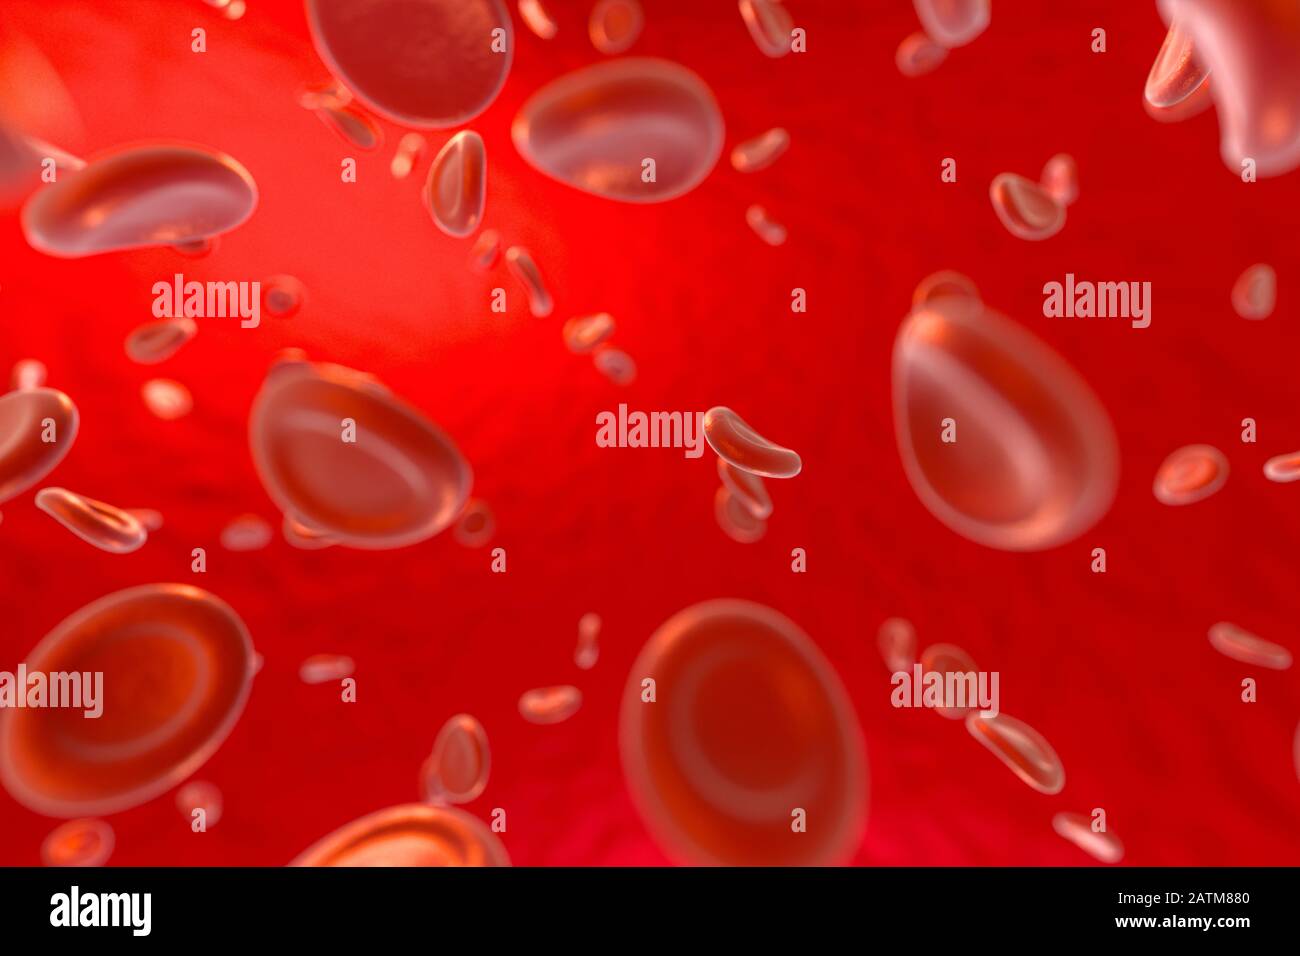 Blood and red blood cells,abstract conception,life and health,3d rendering. Computer digital drawing. Stock Photo